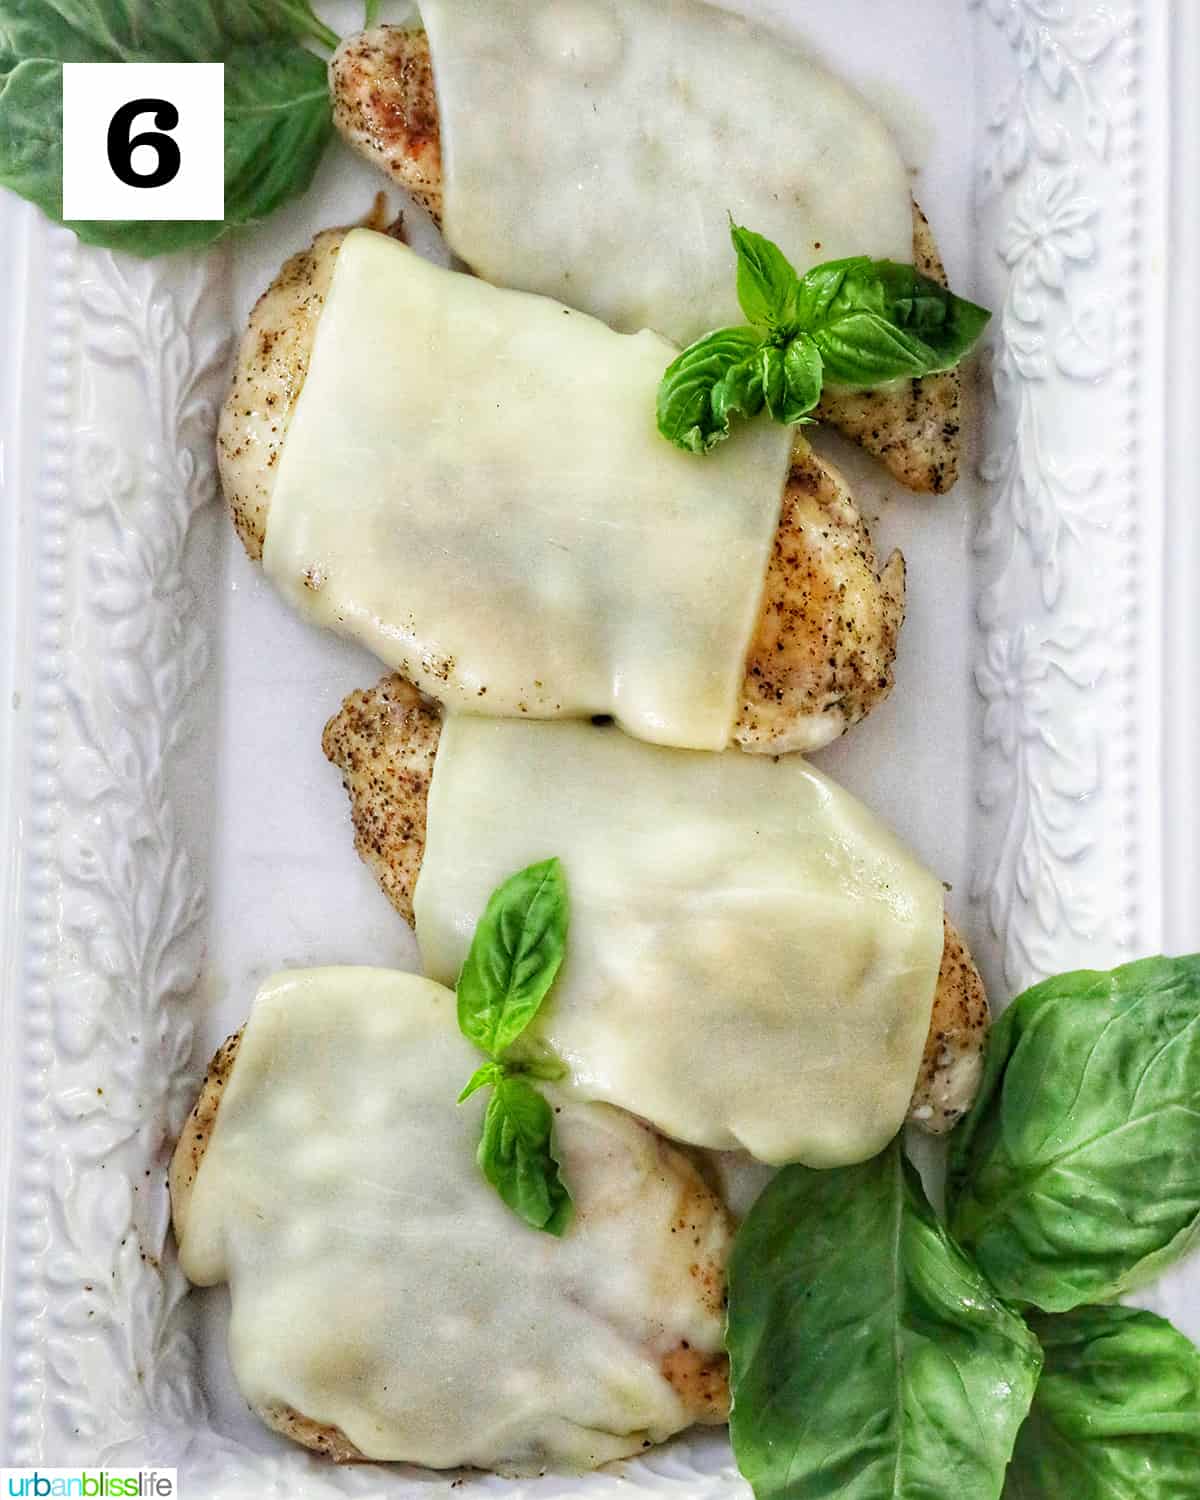 four chicken breasts topped with melted cheese and basil leaves in a white serving platter.